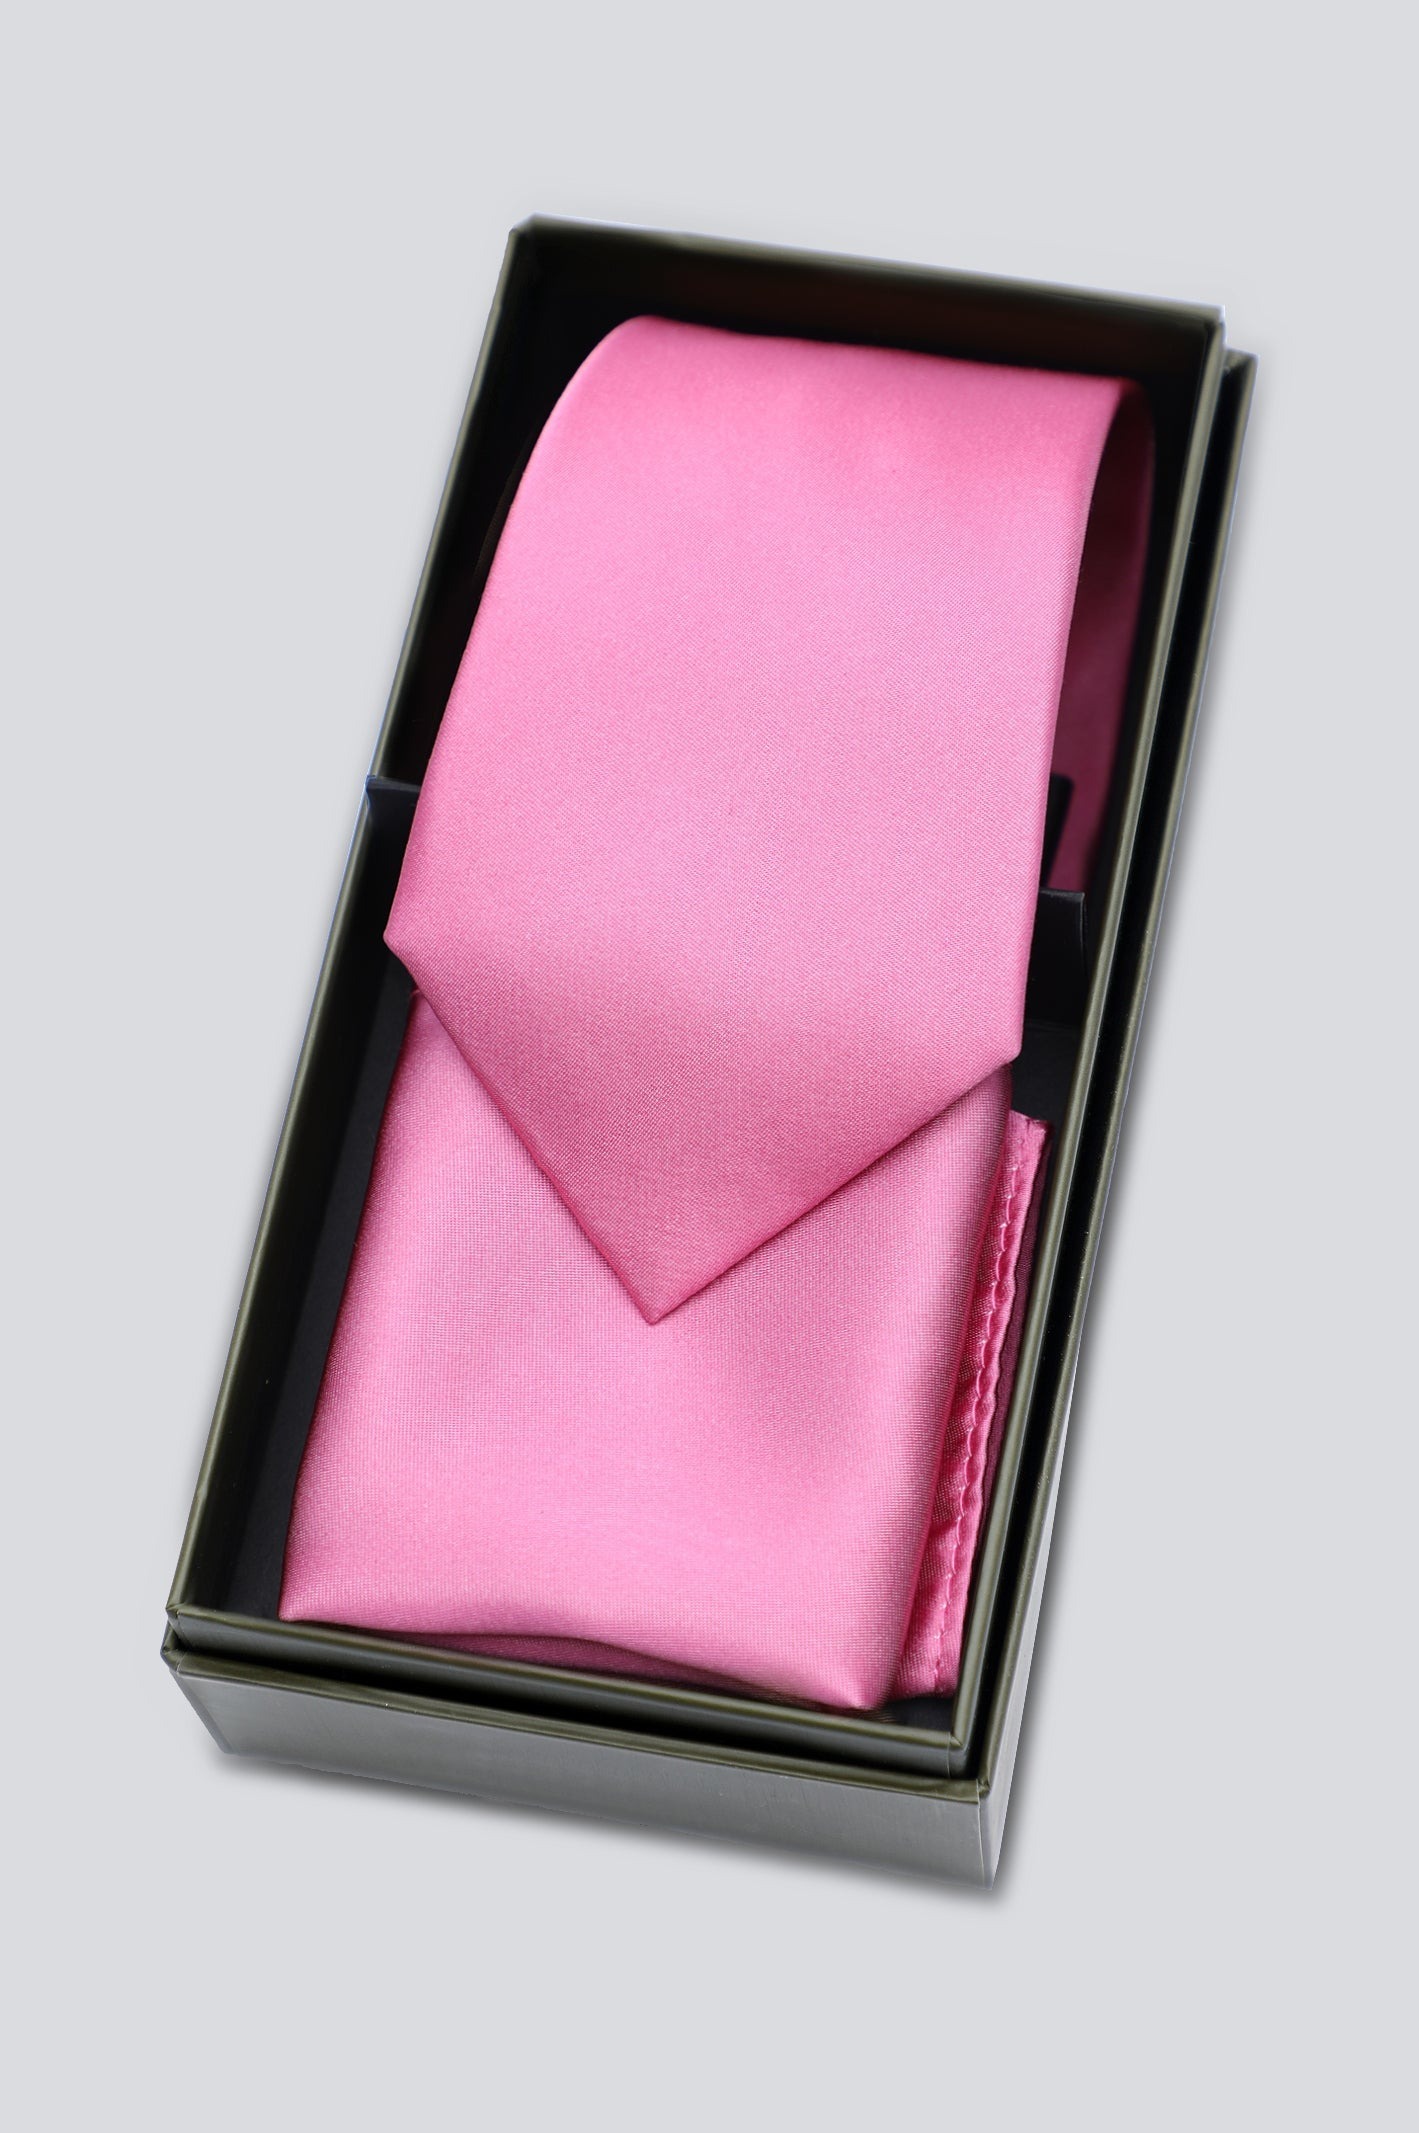 
Pink-Luxury-Tie-With-Pocket-Square